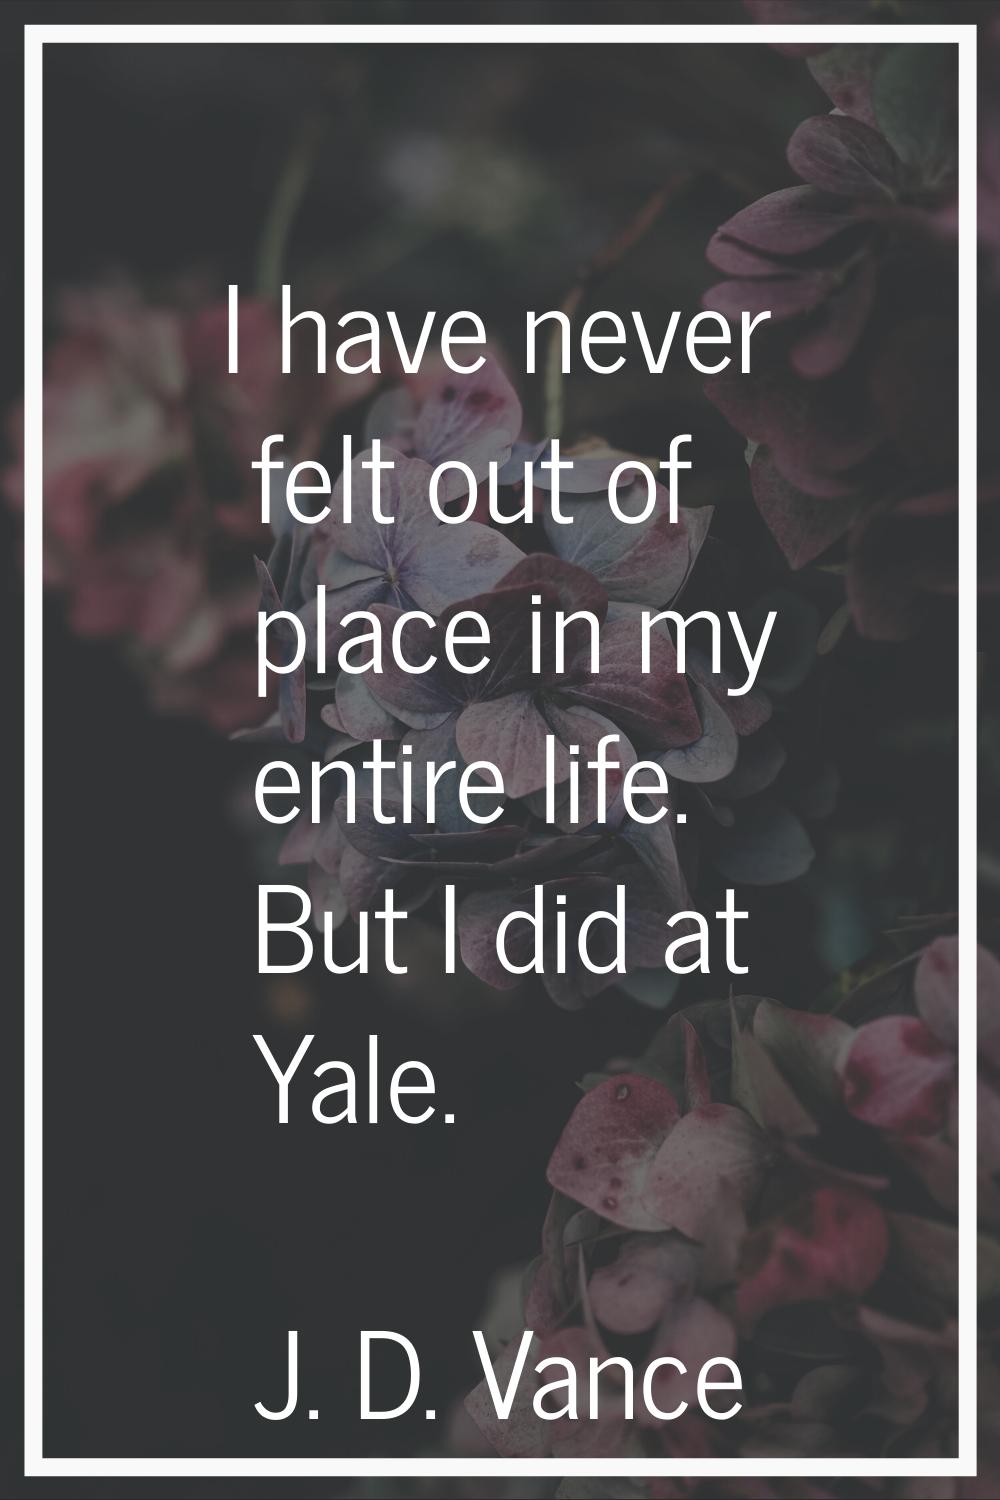 I have never felt out of place in my entire life. But I did at Yale.